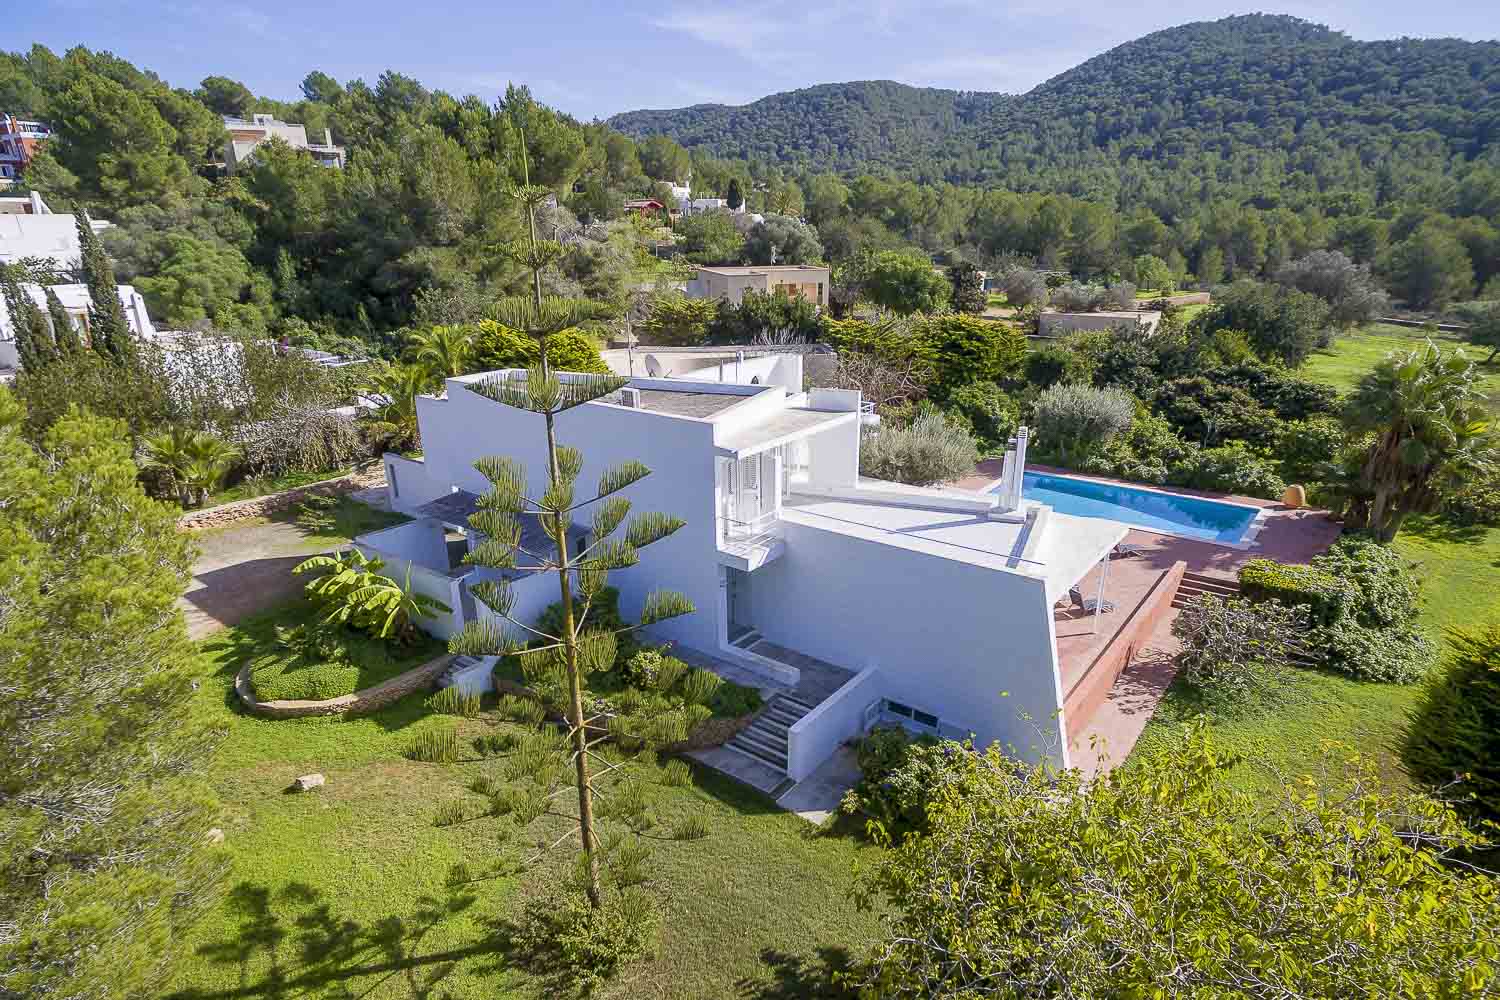 Panoramic house for rent with swimming pool in ibiza in full nature